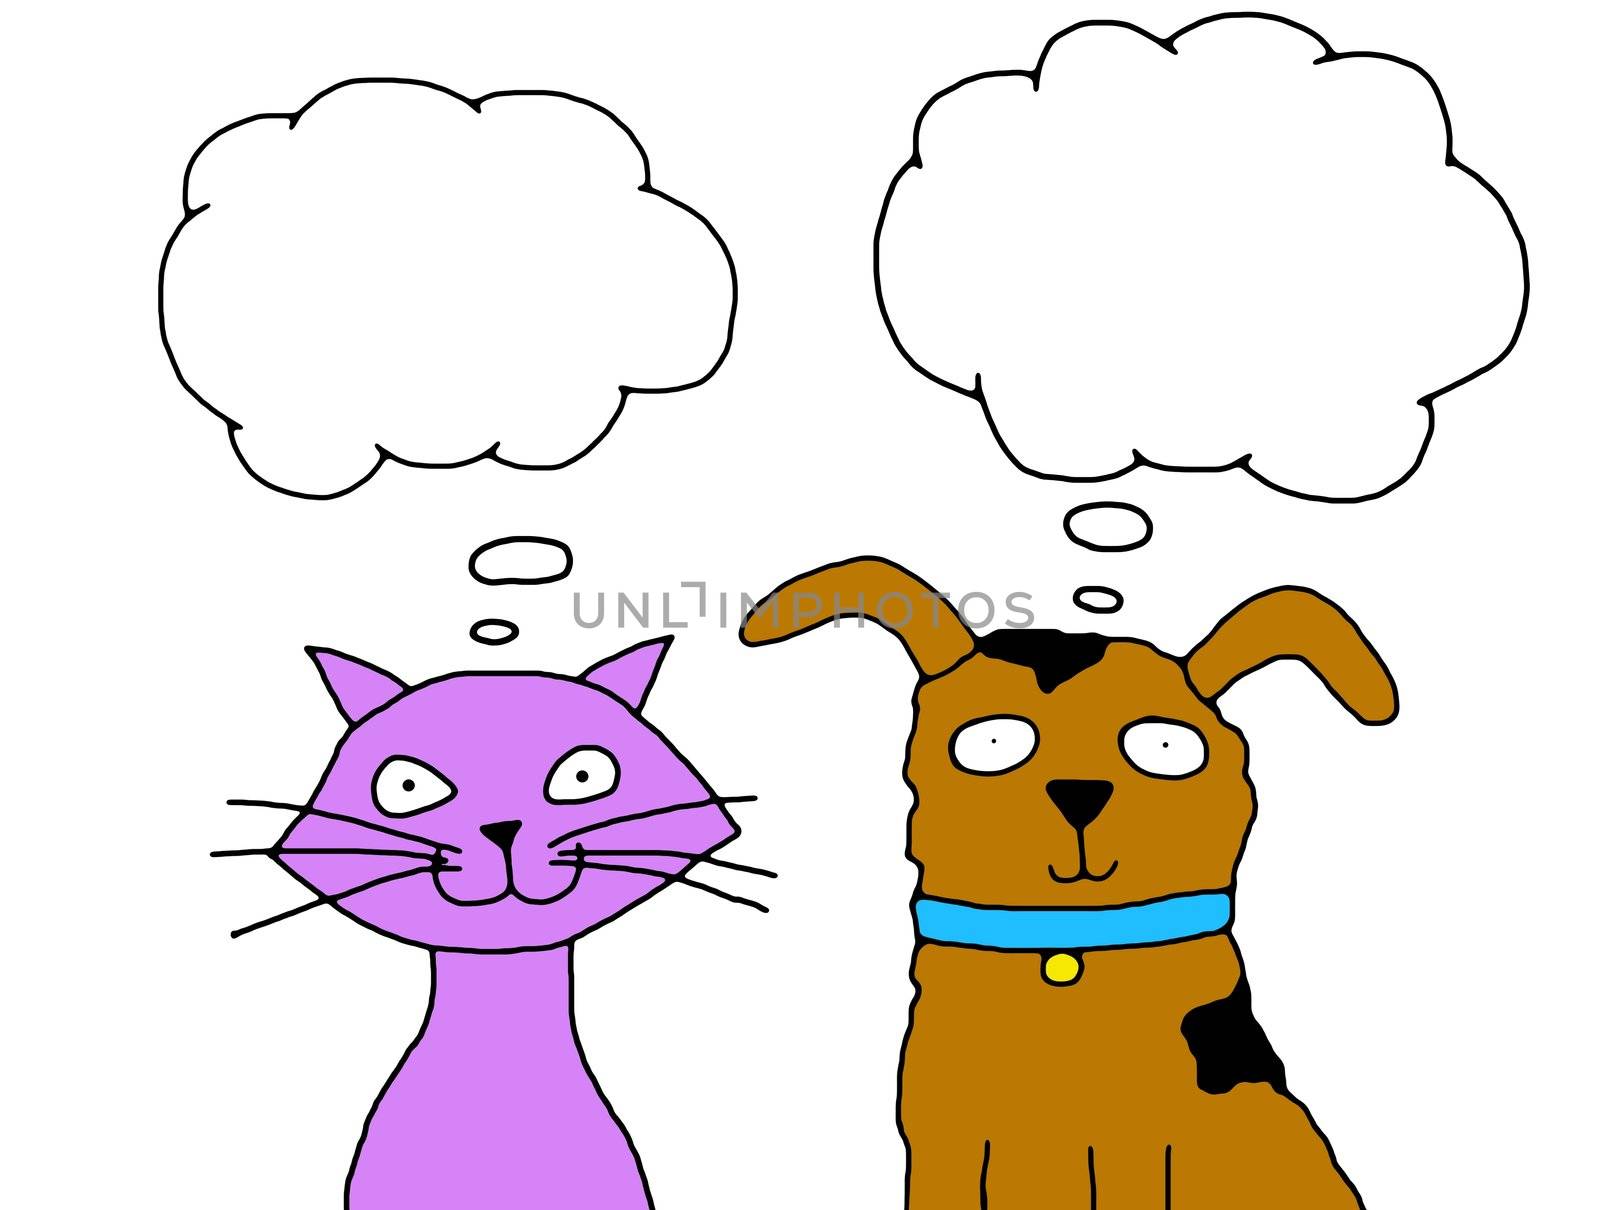 Illustration of a Cat and Dog with thought bubbles